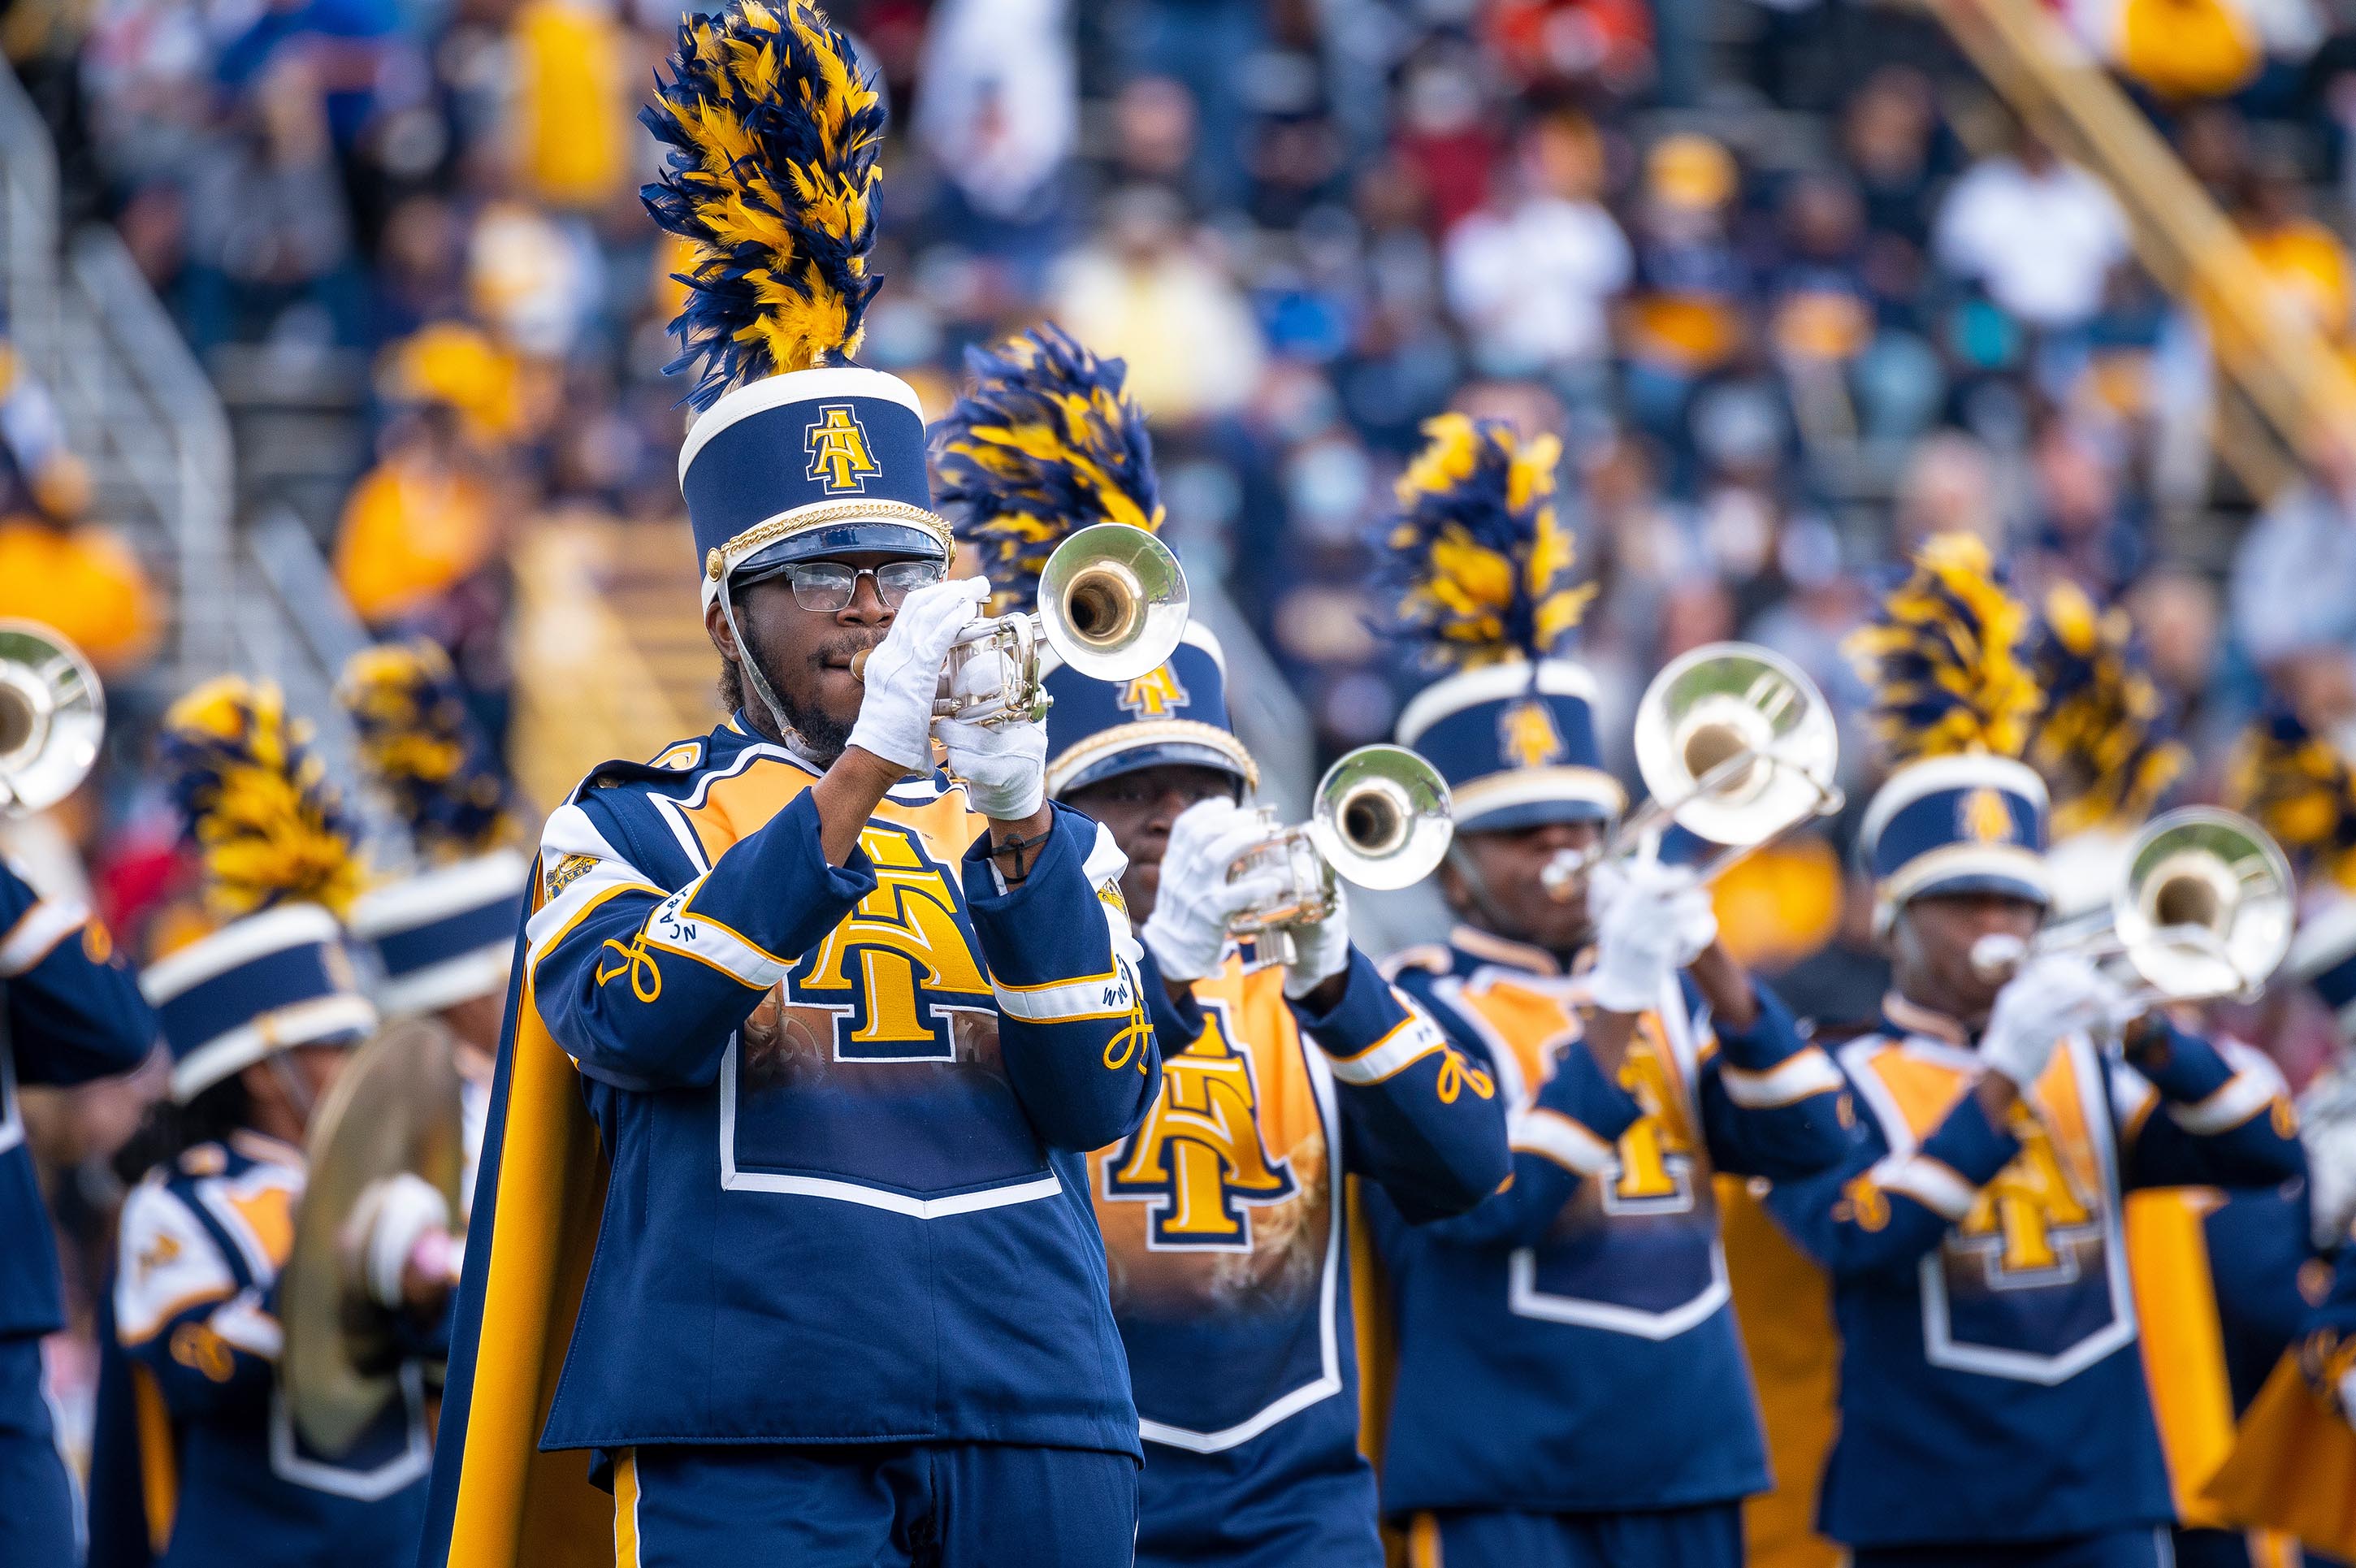 N.C. A&T’s Famous Blue and Gold Marching Machine to Perform at Detroit